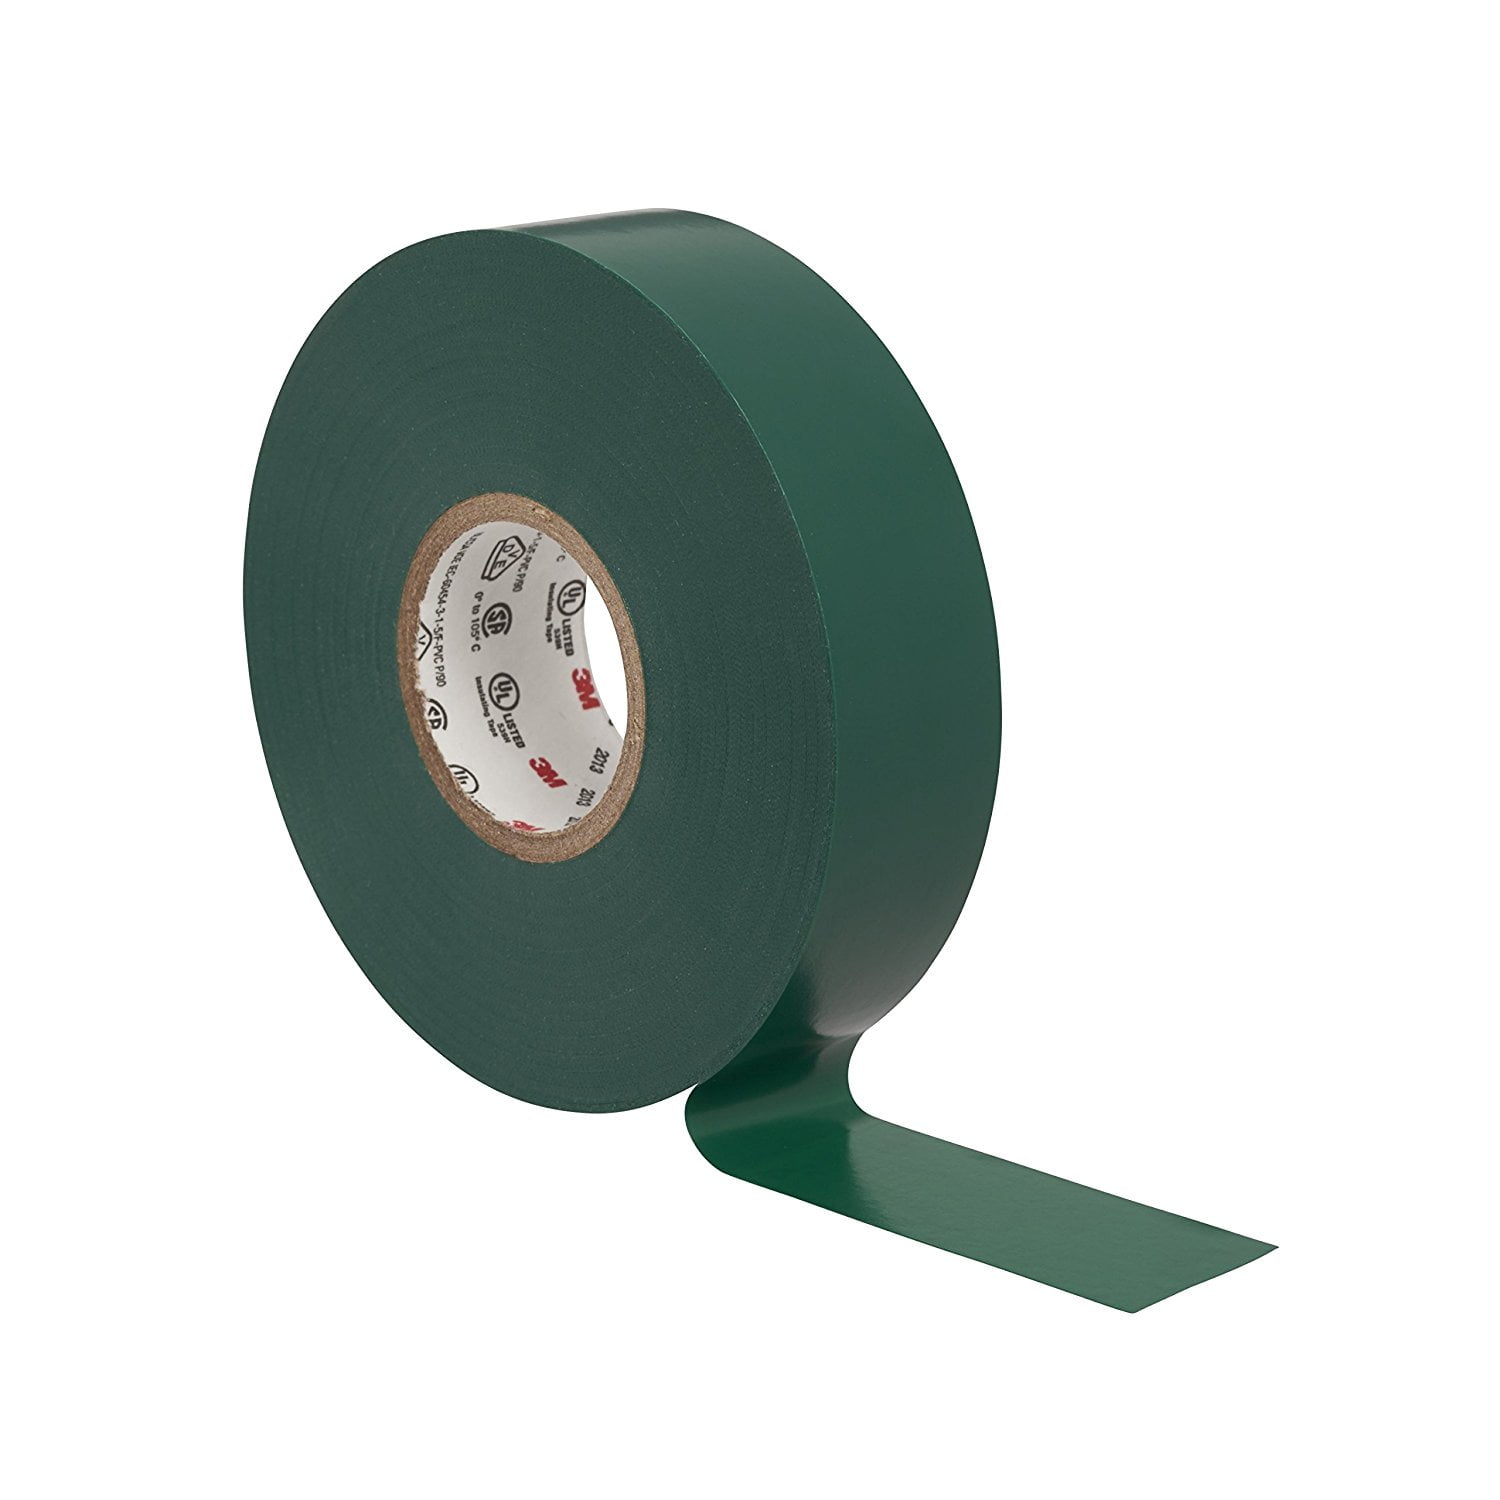 3M Scotch #35 Electrical Tape 10851-BA-10, 3/4-Inch by 66-Foot by  0.007-Inch, Green 